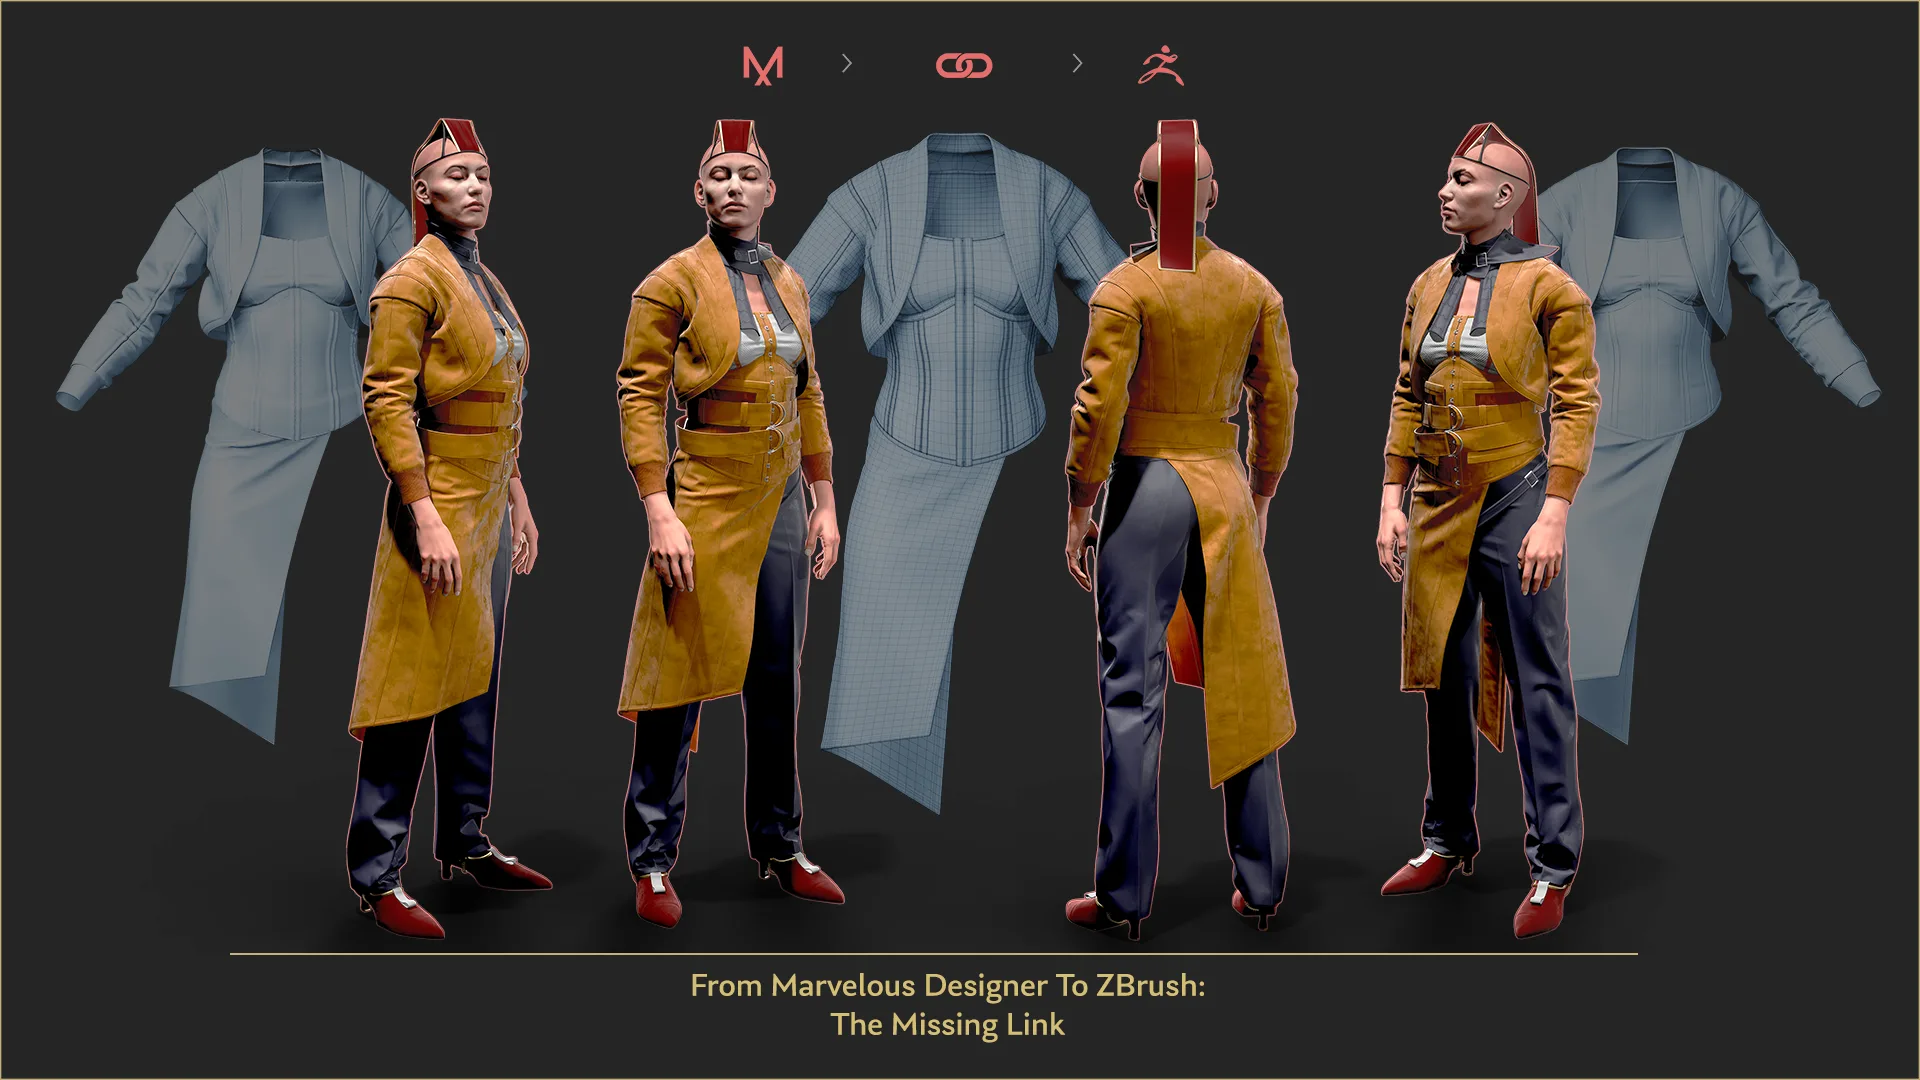 From Marvelous Designer To ZBrush: The Missing Link